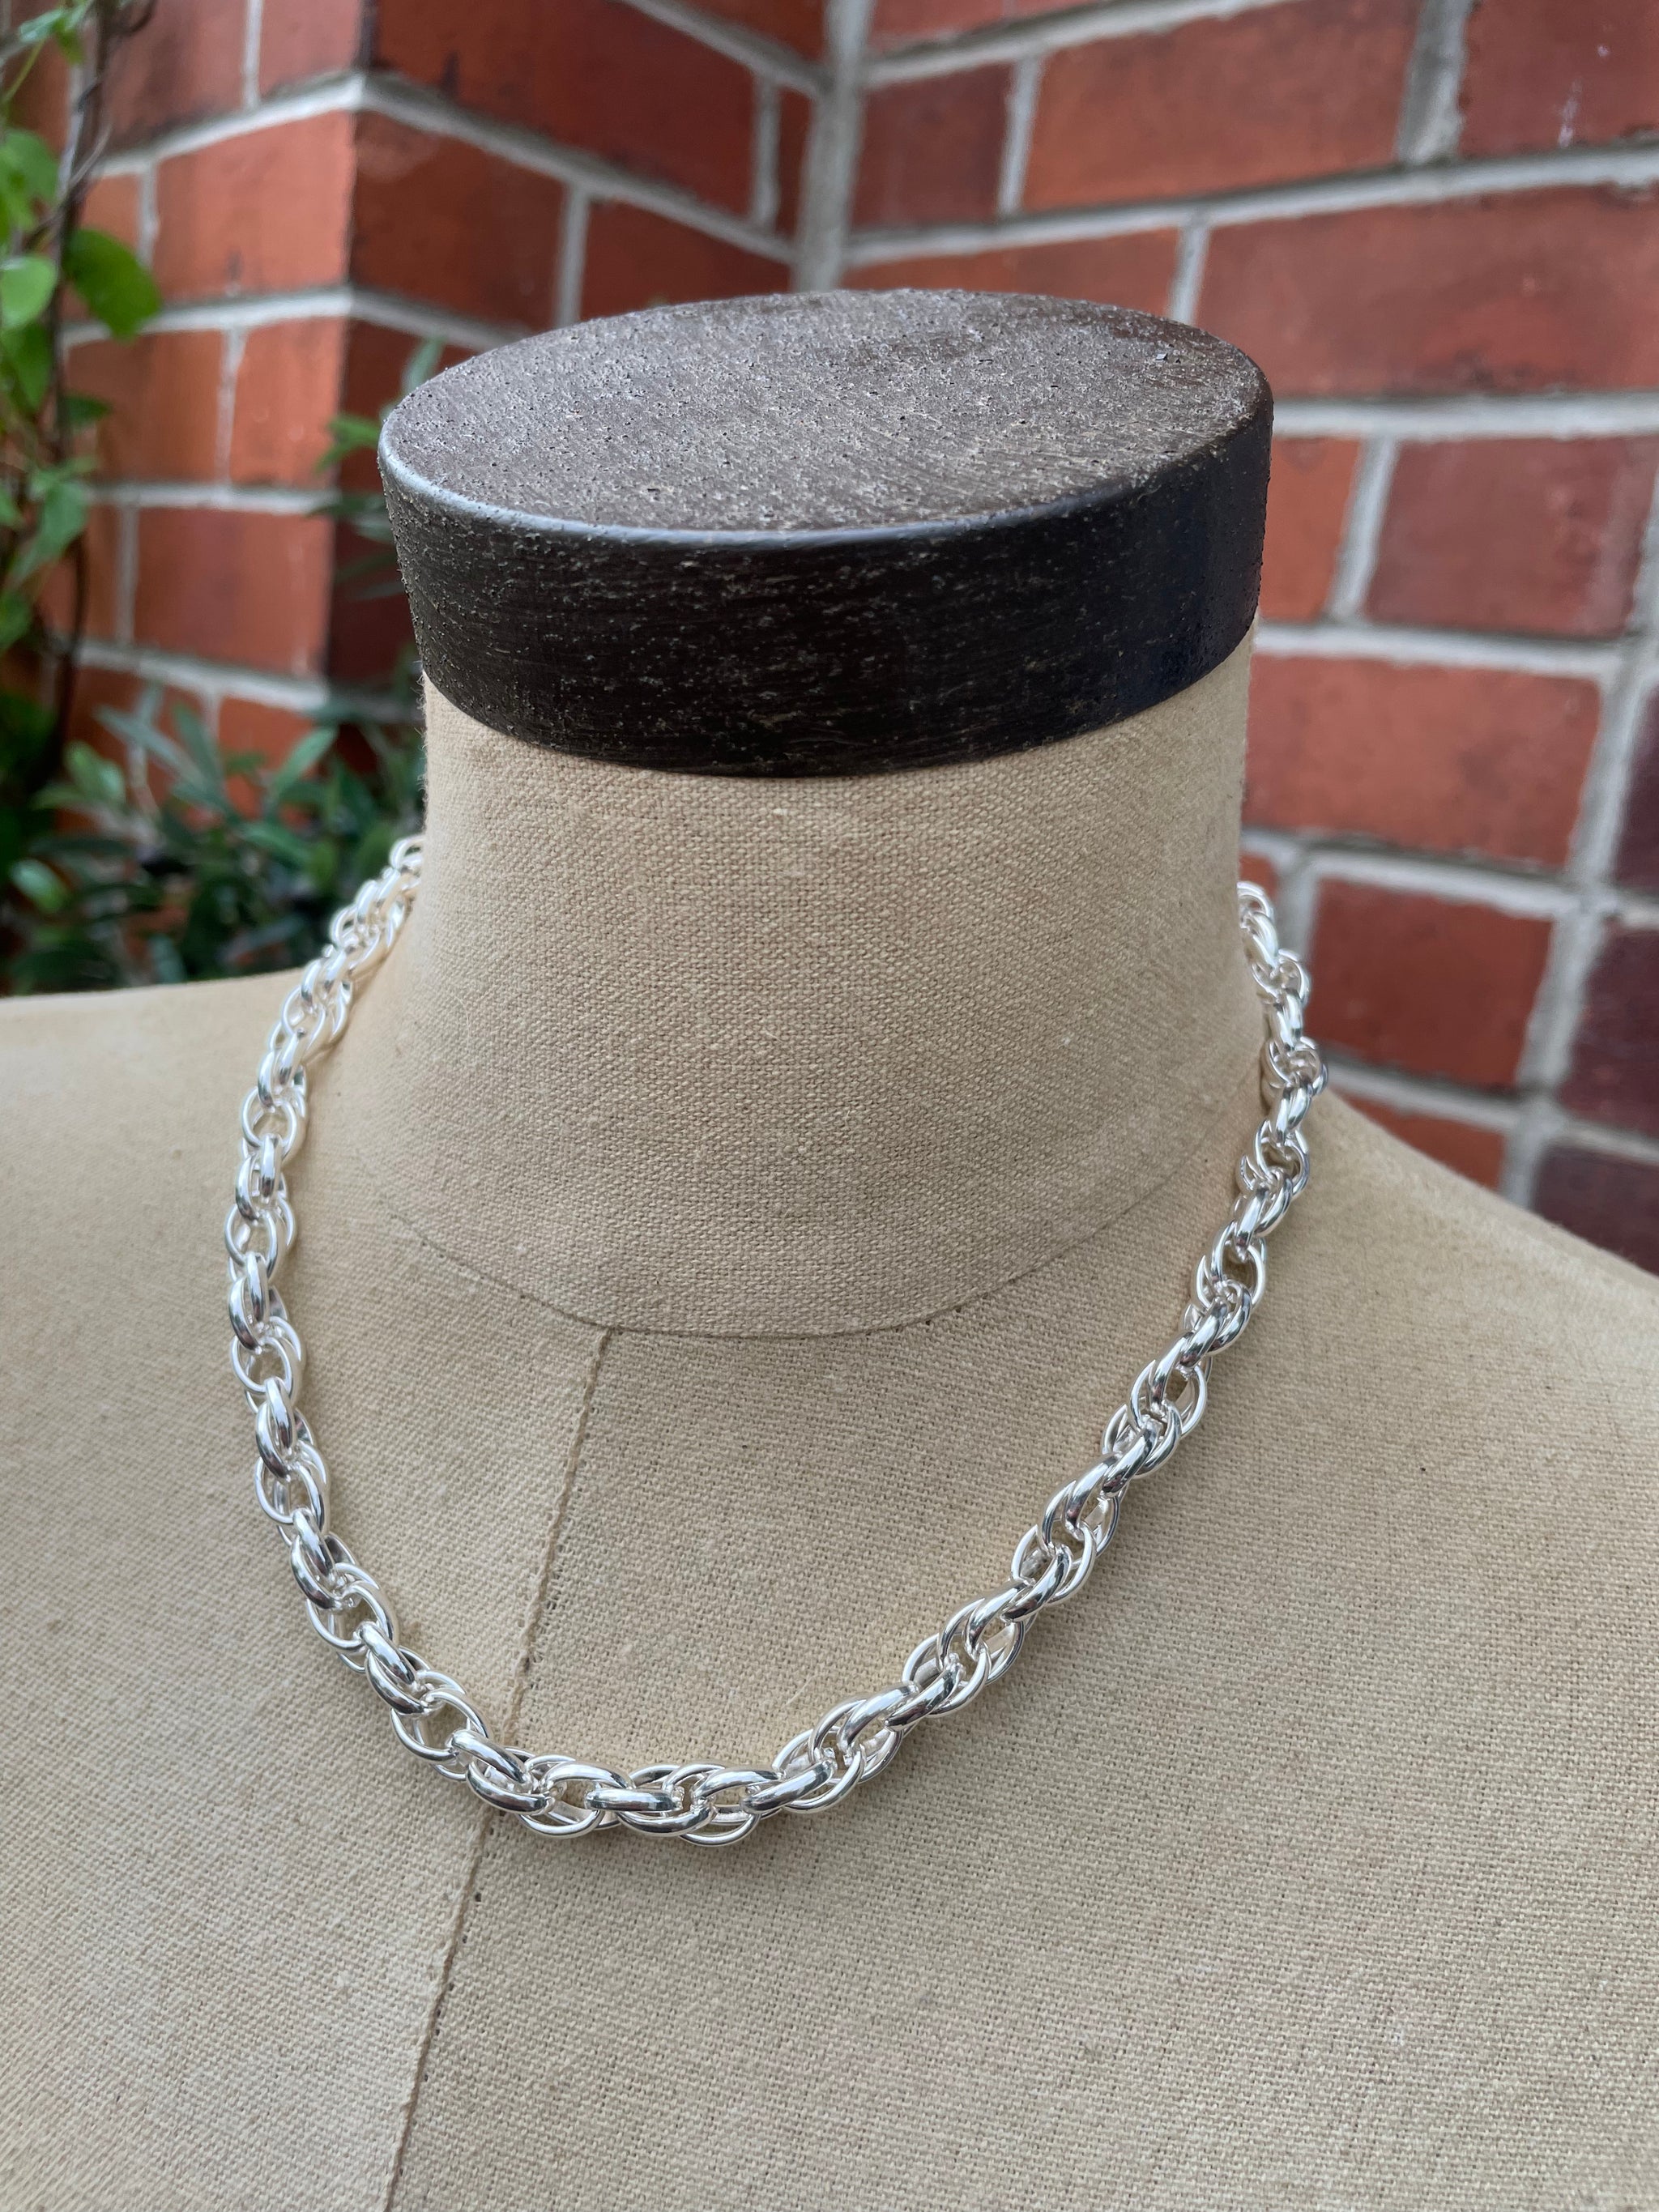 Interlinked chain necklace